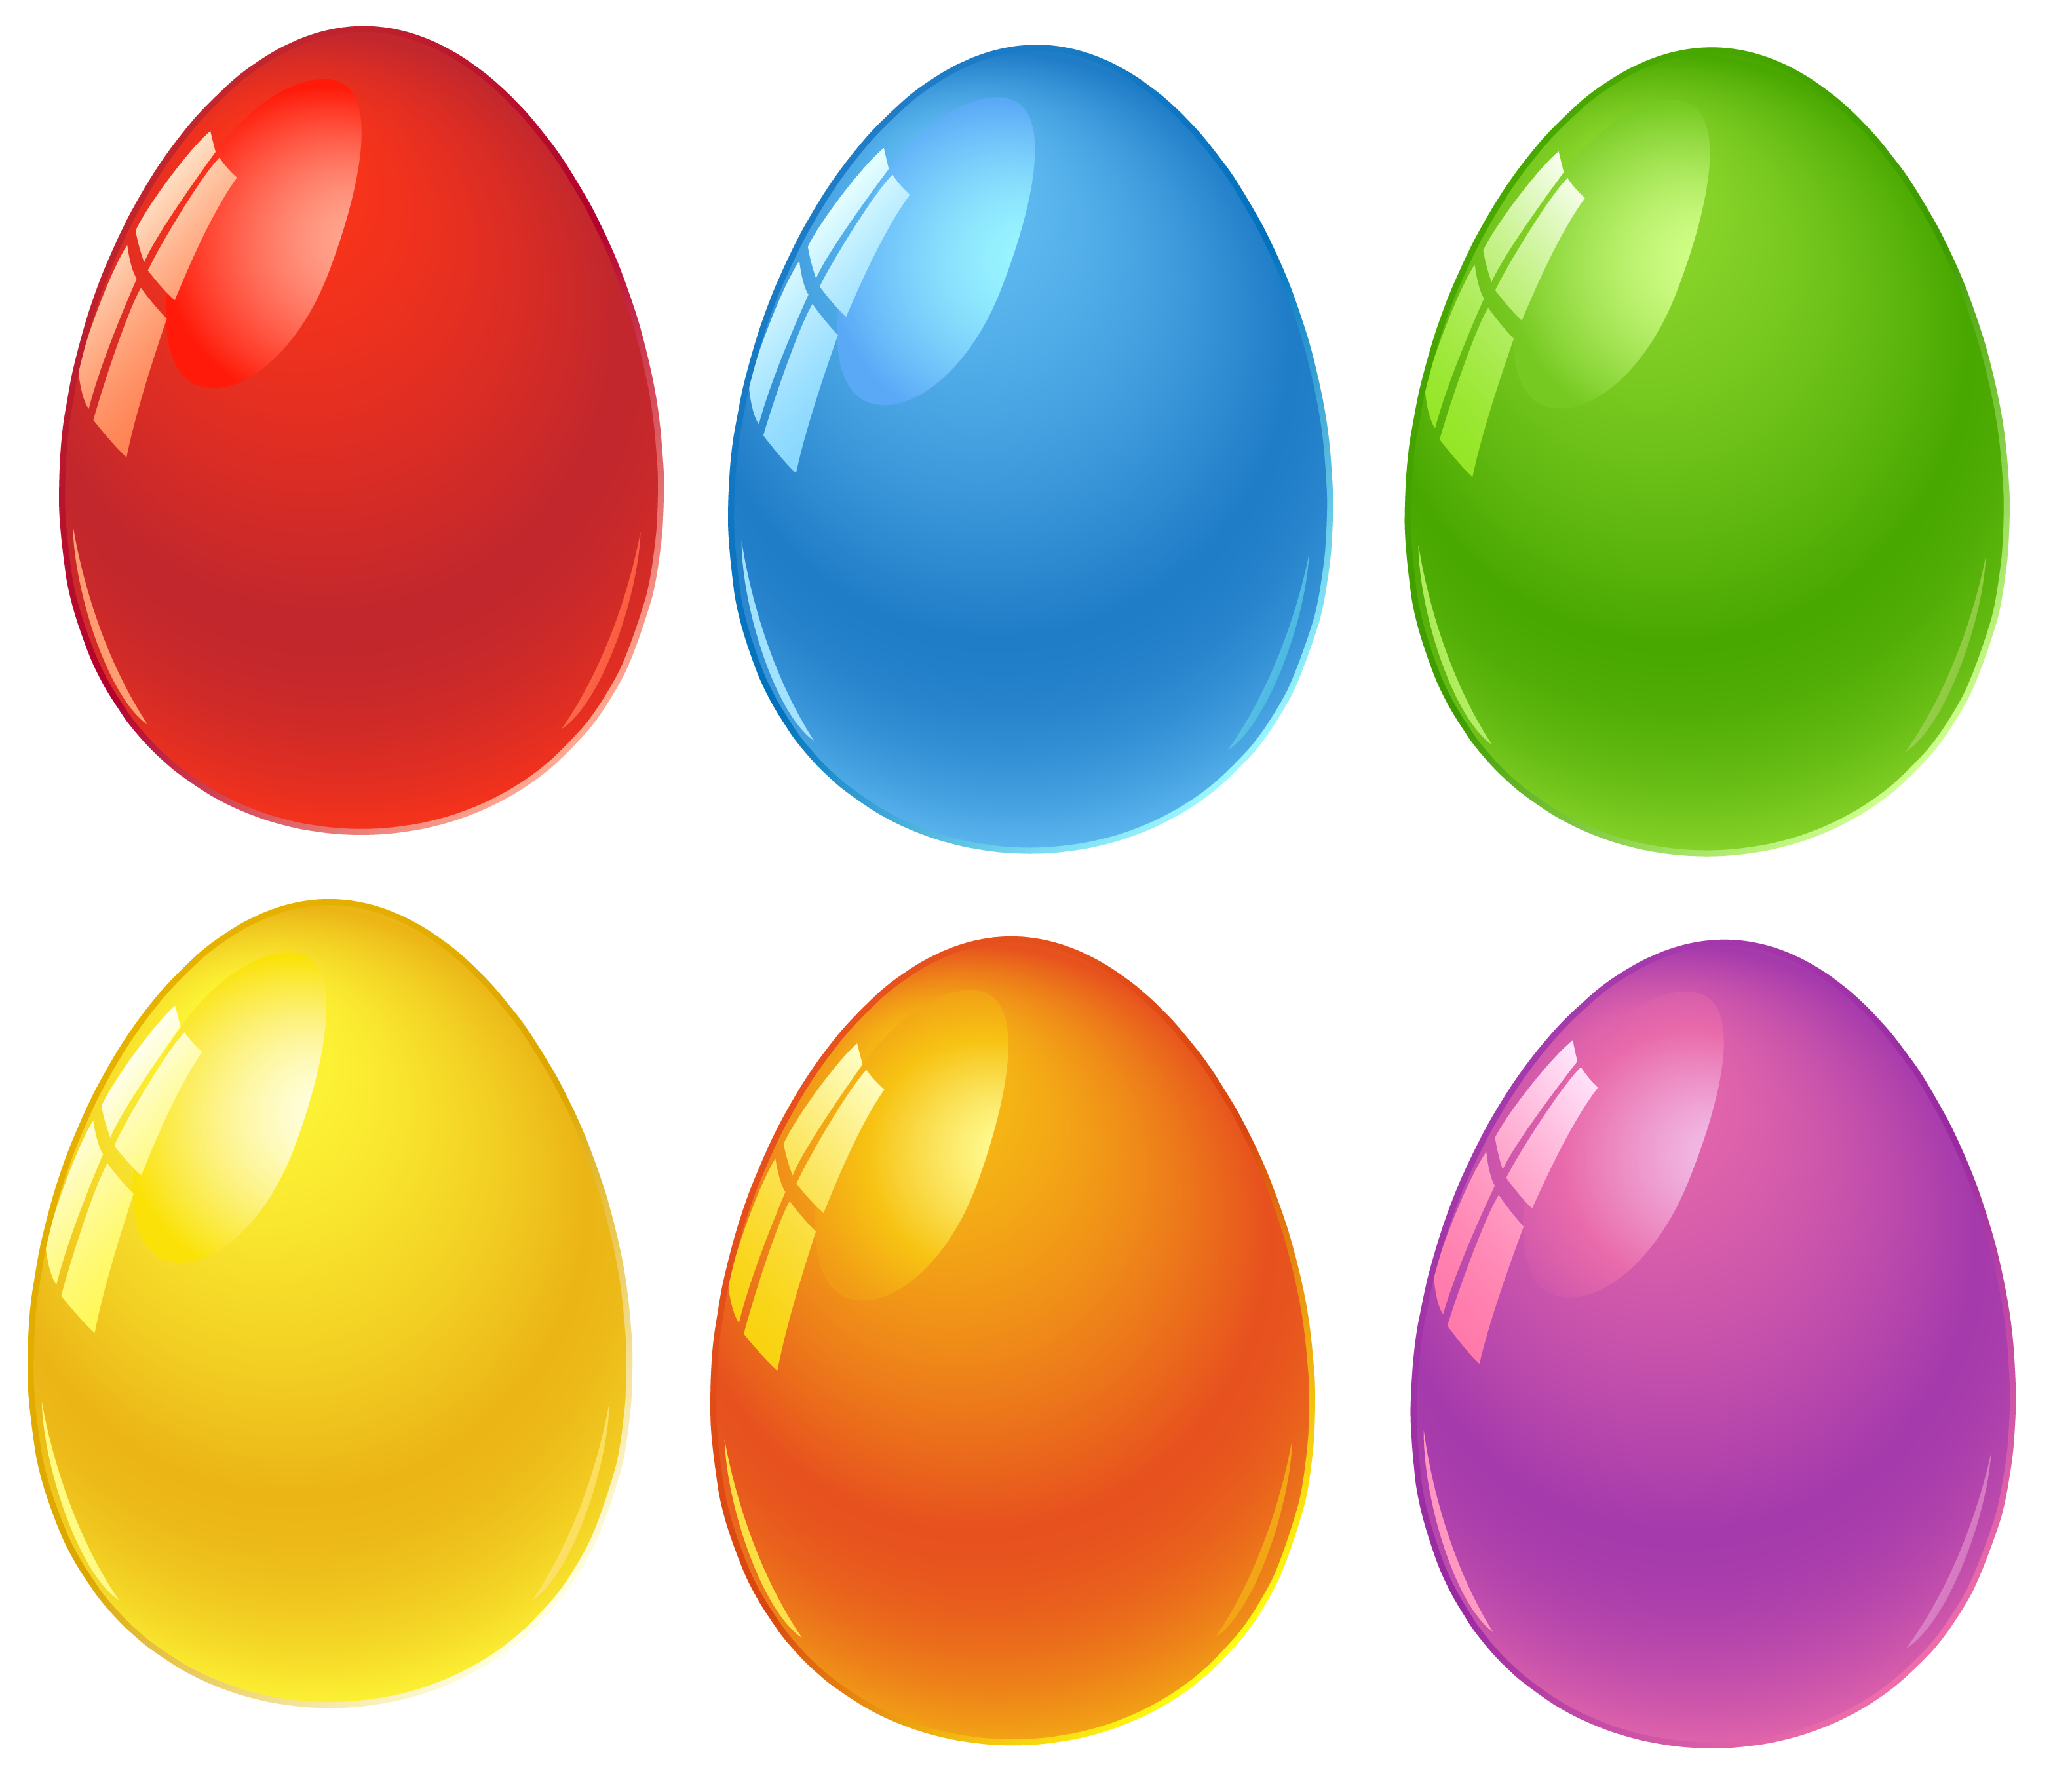 Puzzle clipart easter egg. Colored eggs png obr